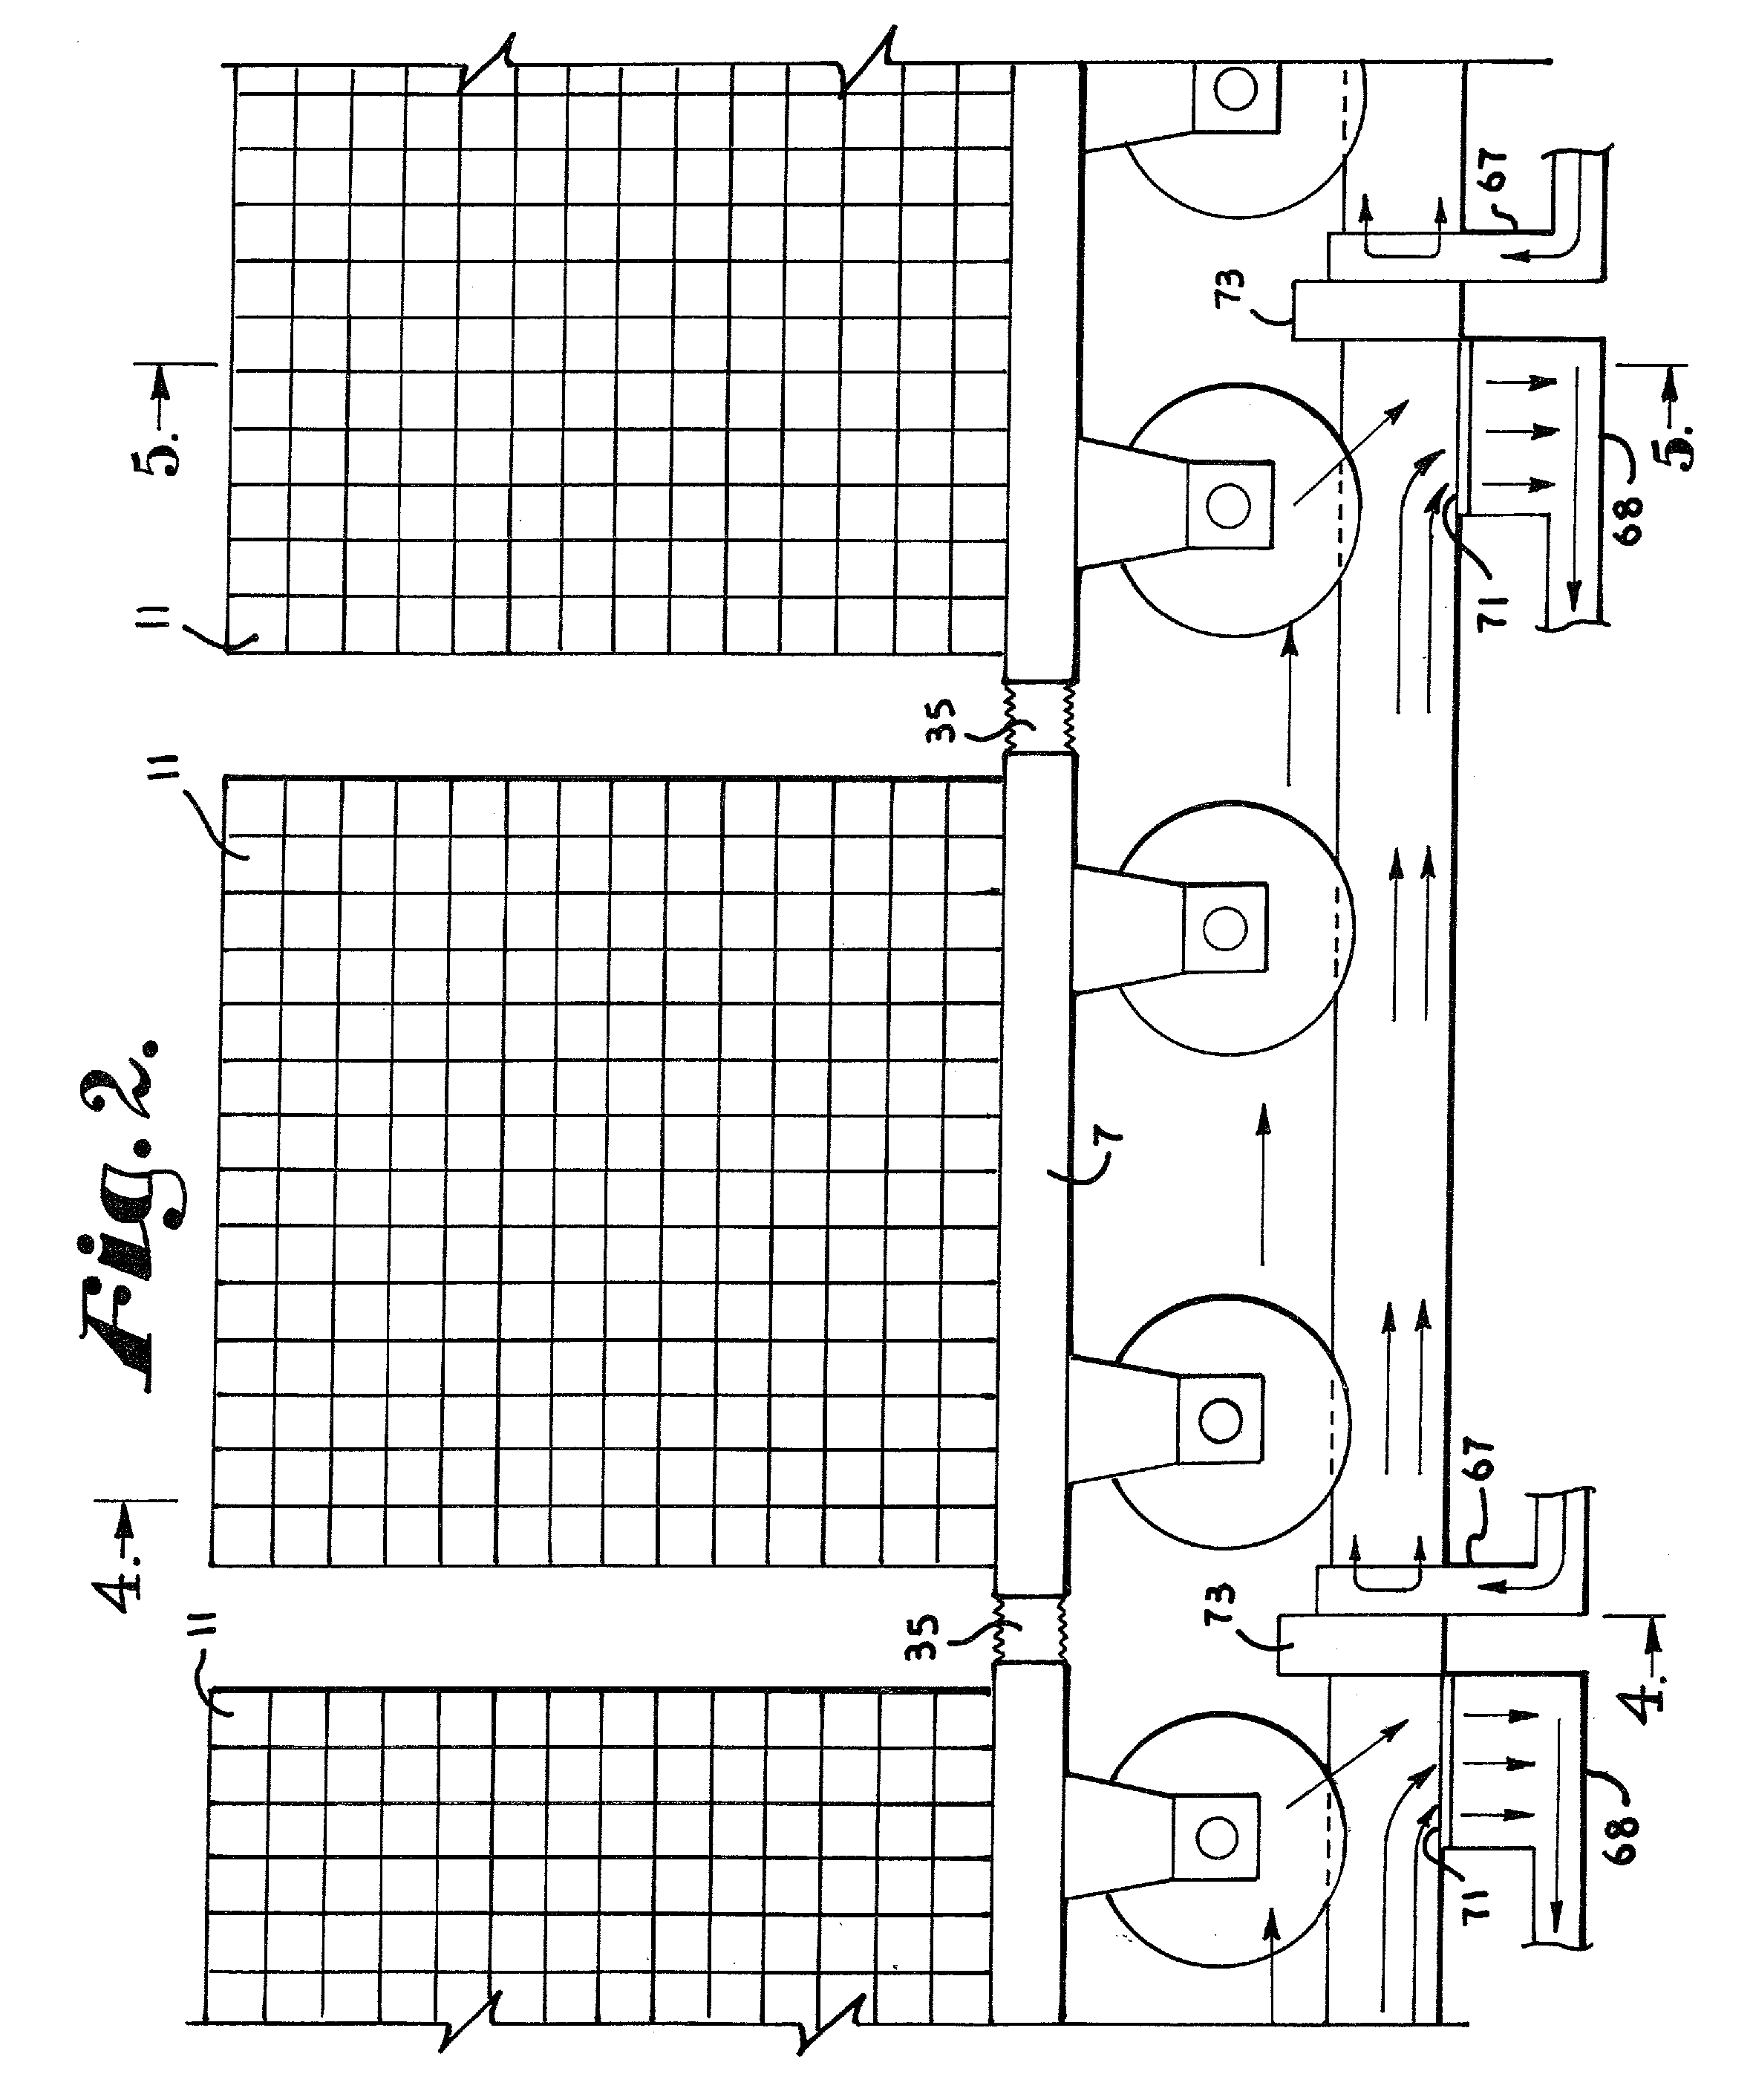 Method and apparatus for cooling the underside of kiln cars